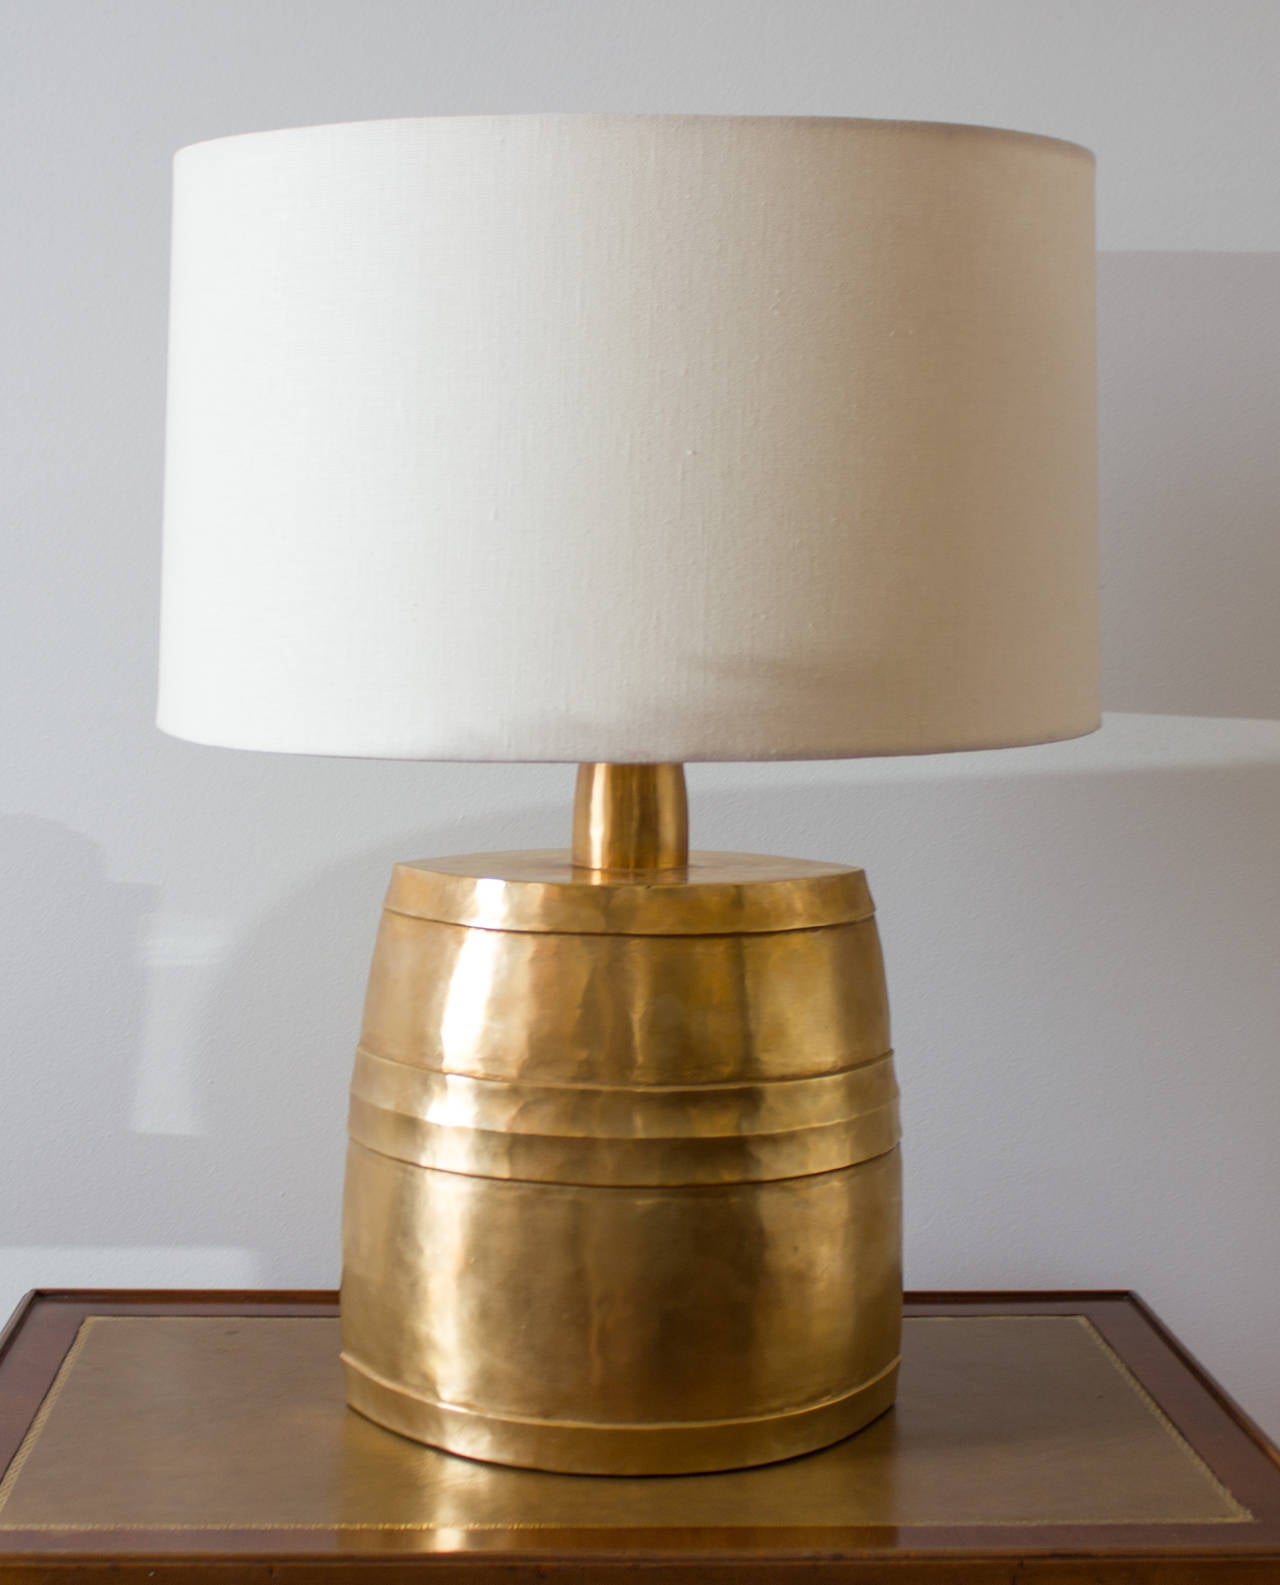 This elegant table lamp features a 24-karat gold plate finish.